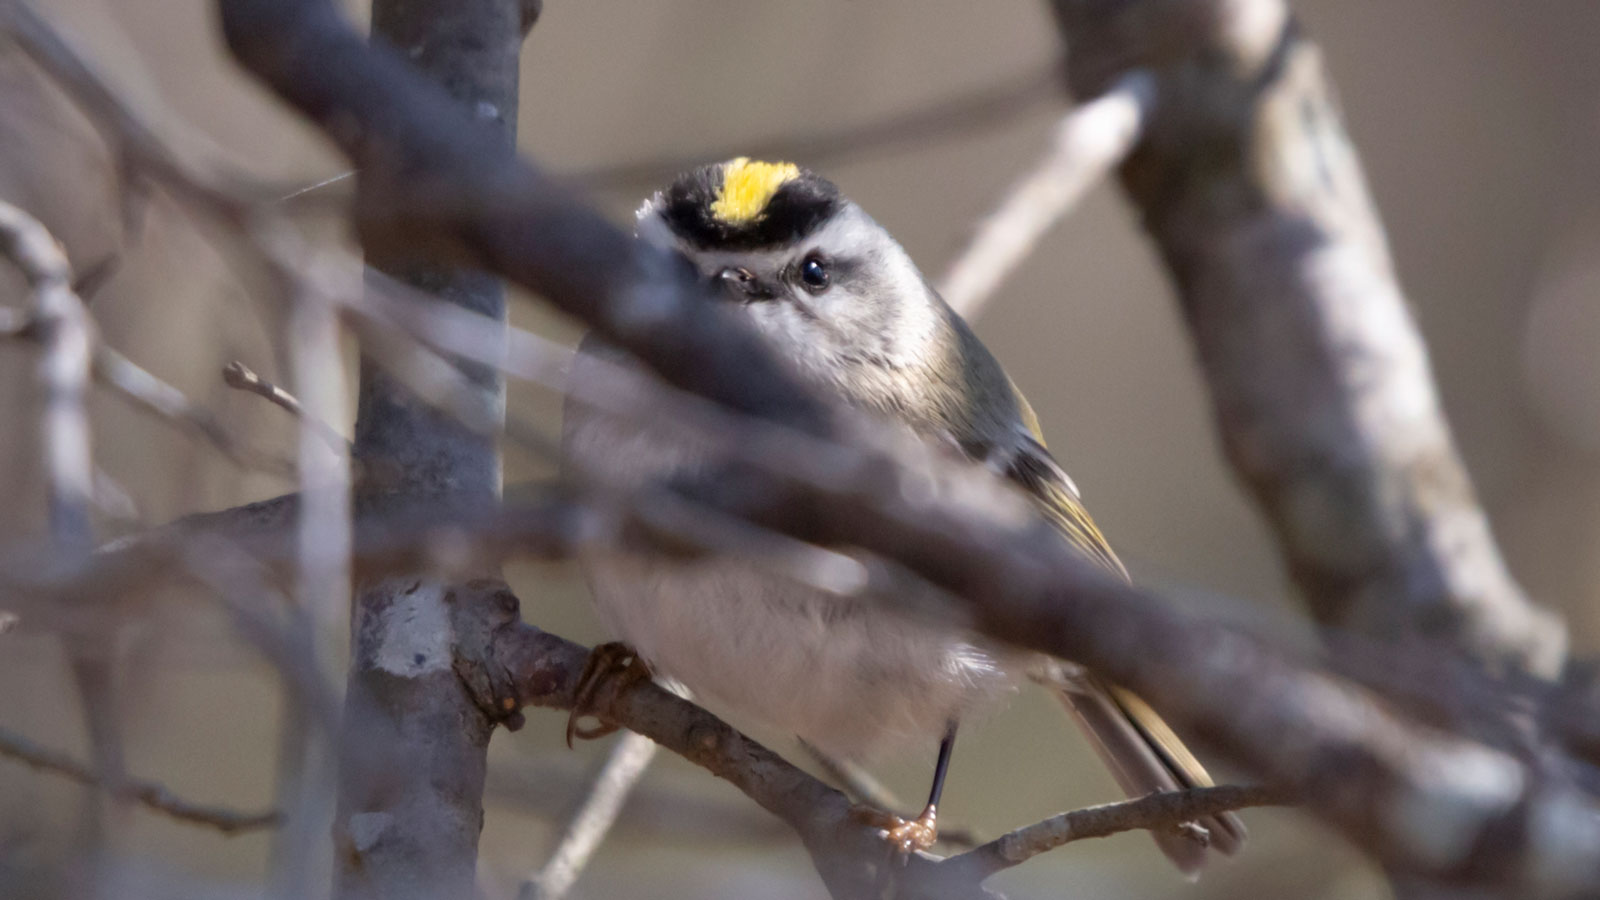 Golden-crowned kinglet looking out from its hiding spot behind the bramble of bare branches